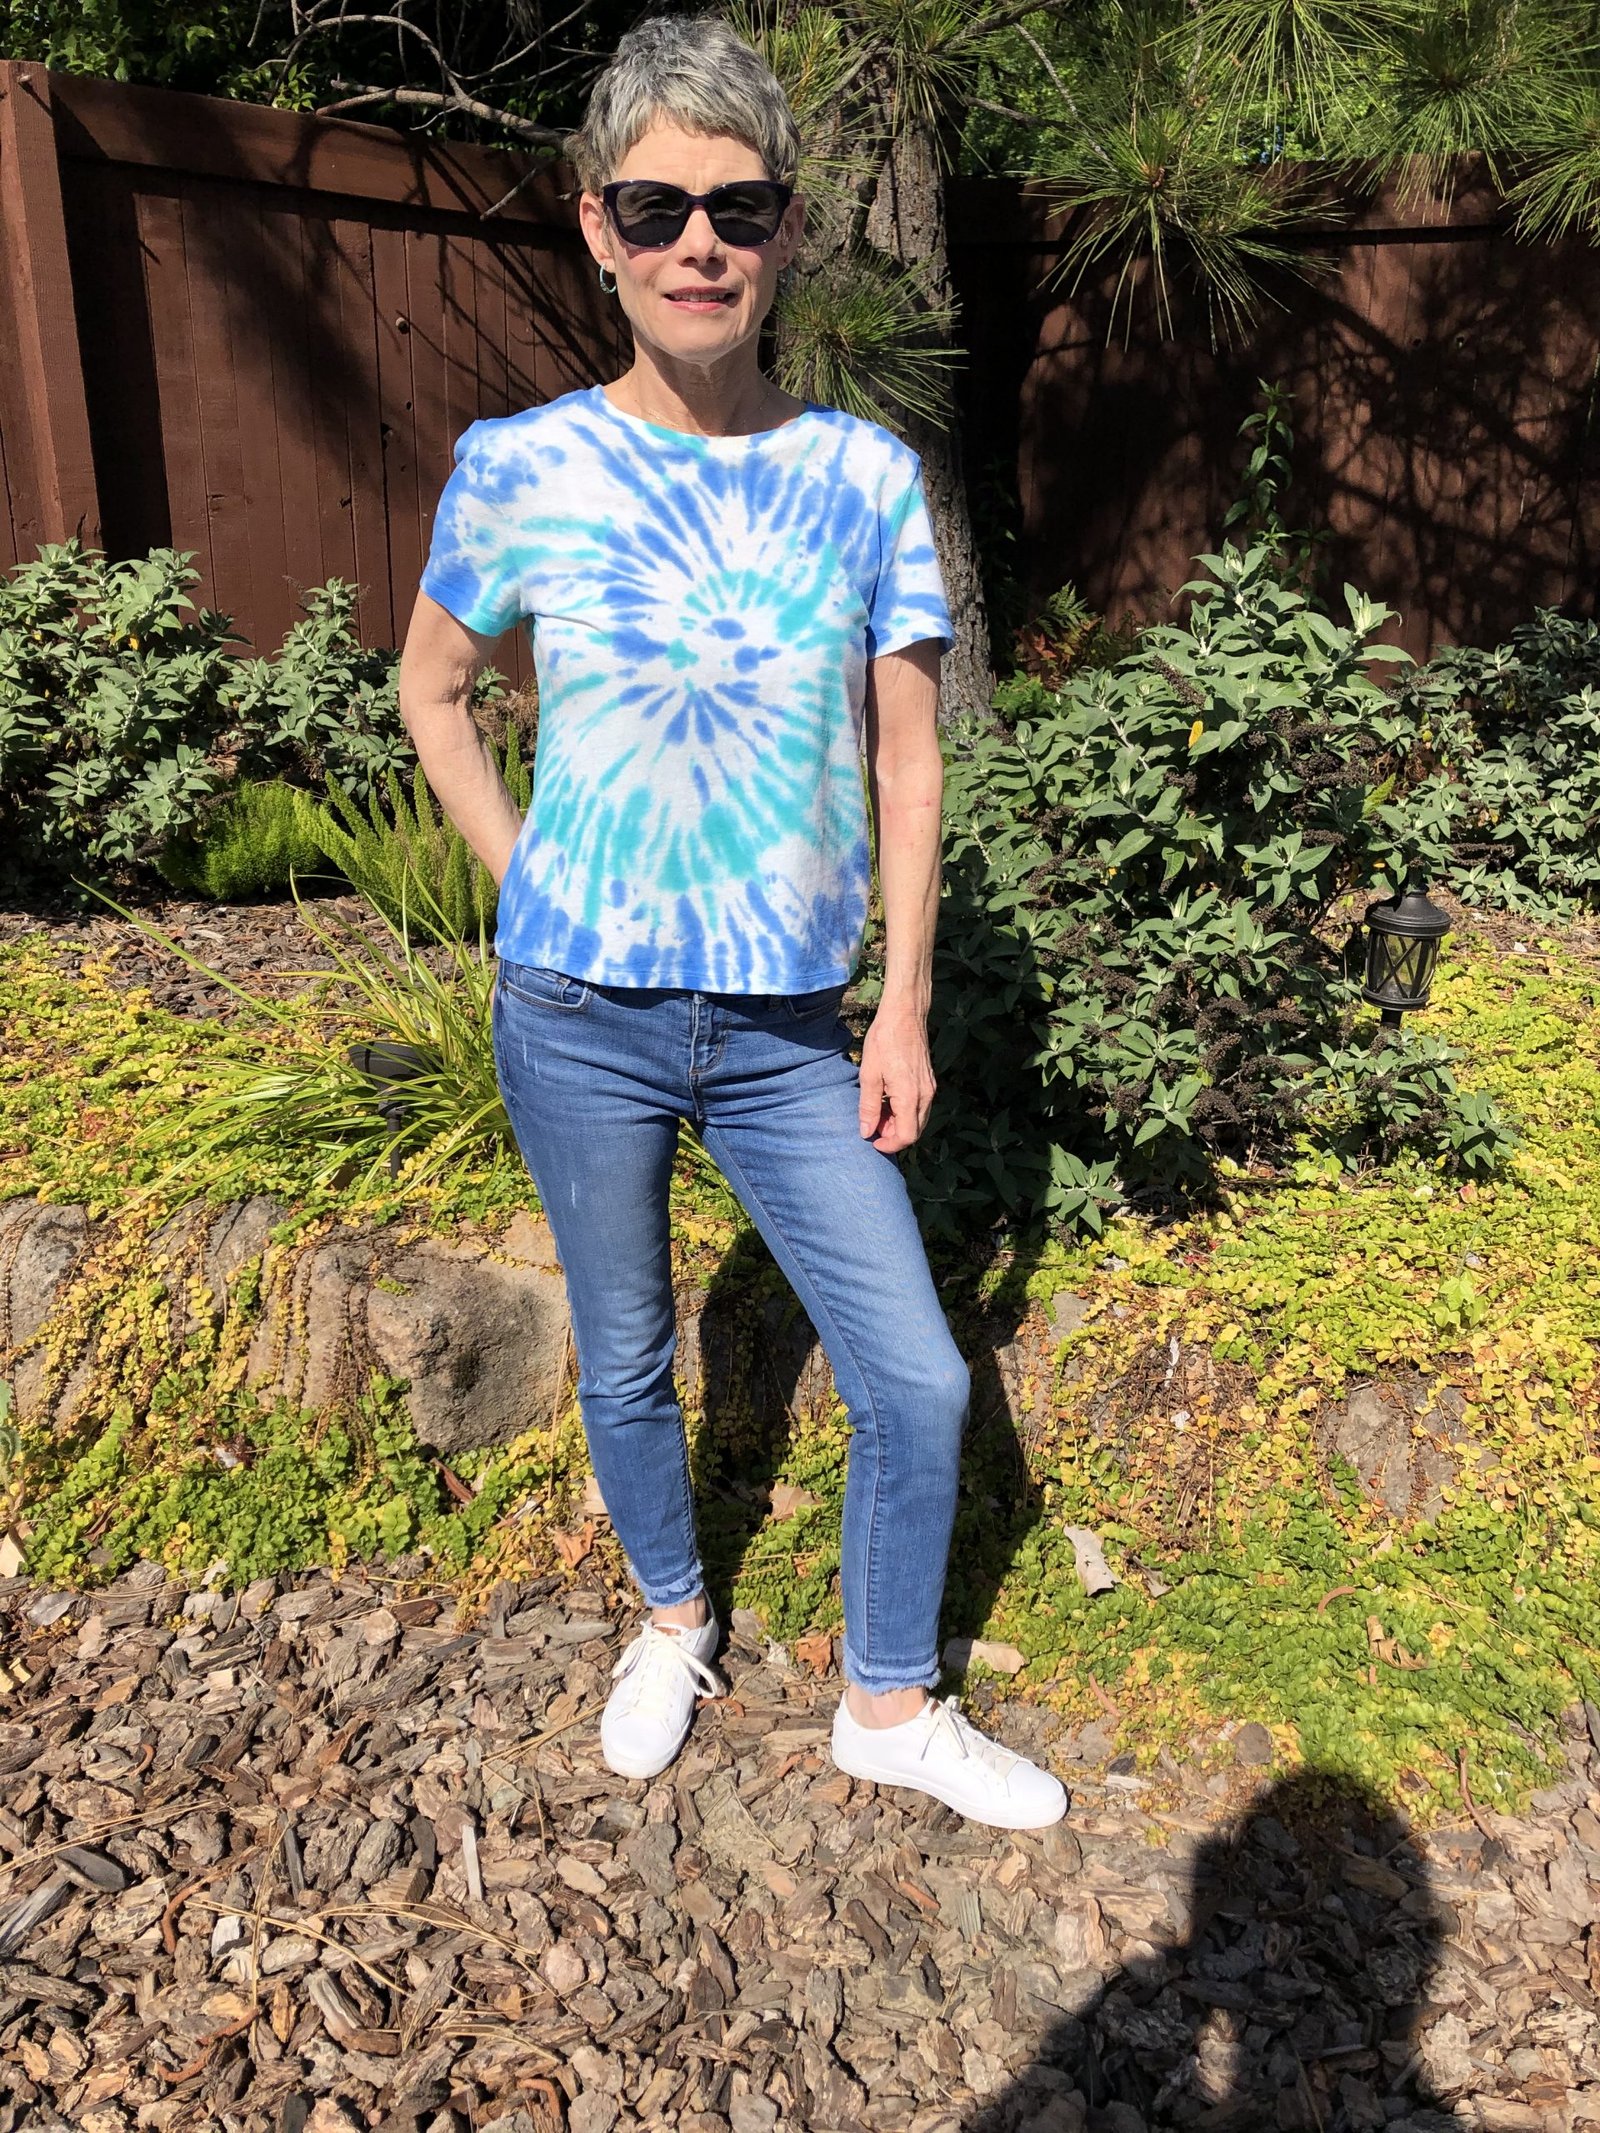 The beautiful blue and teal colors in this tie-die tee are so pretty!